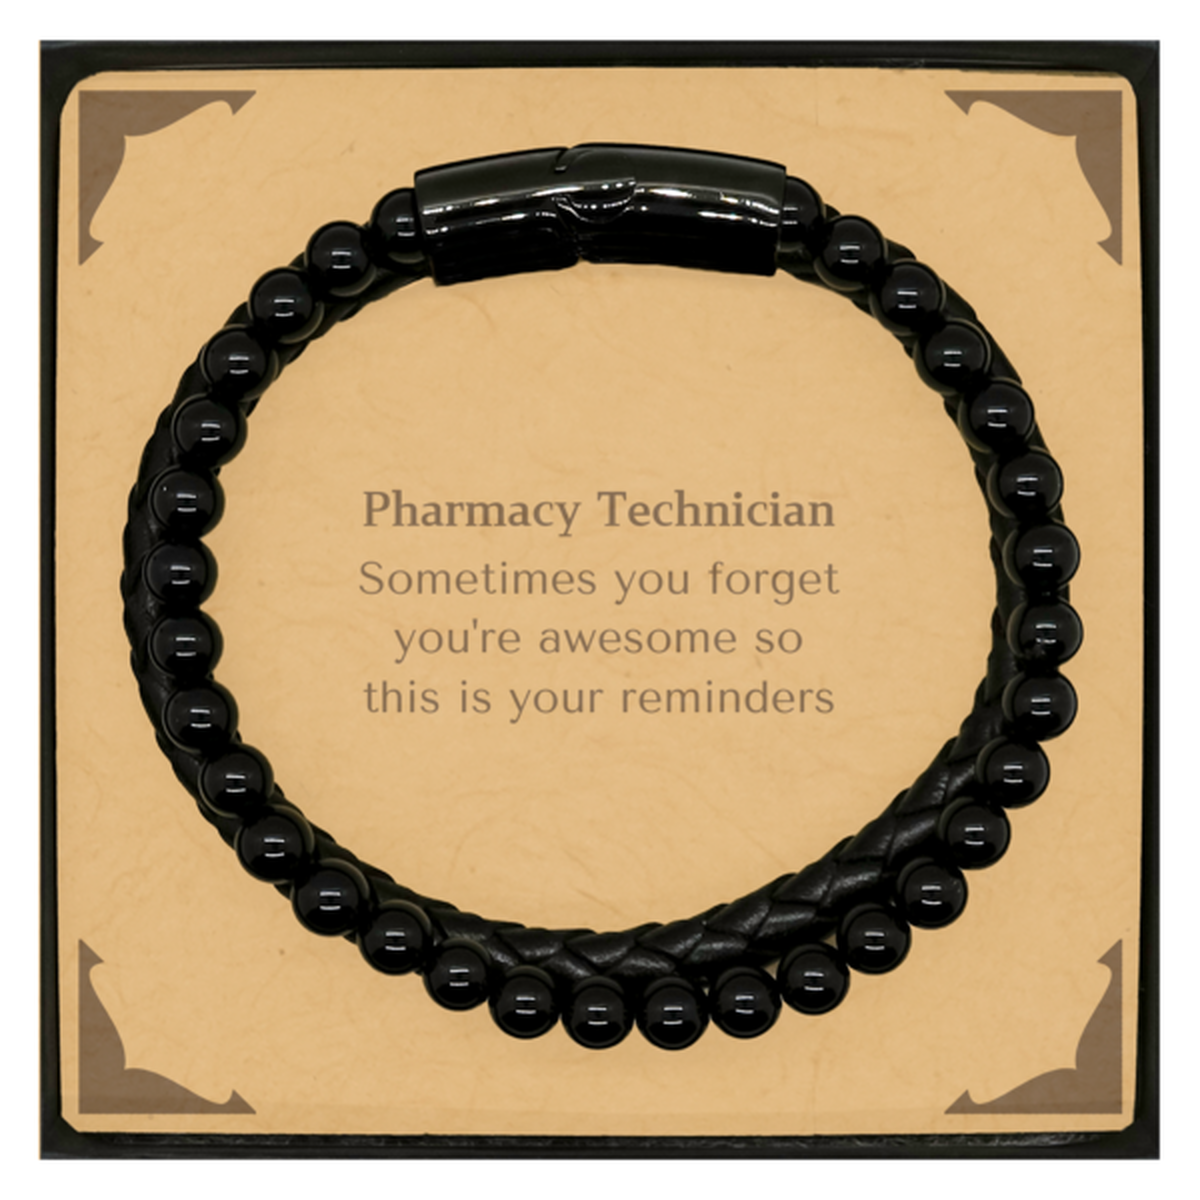 Sentimental Pharmacy Technician Stone Leather Bracelets, Pharmacy Technician Sometimes you forget you're awesome so this is your reminders, Graduation Christmas Birthday Gifts for Pharmacy Technician, Men, Women, Coworkers